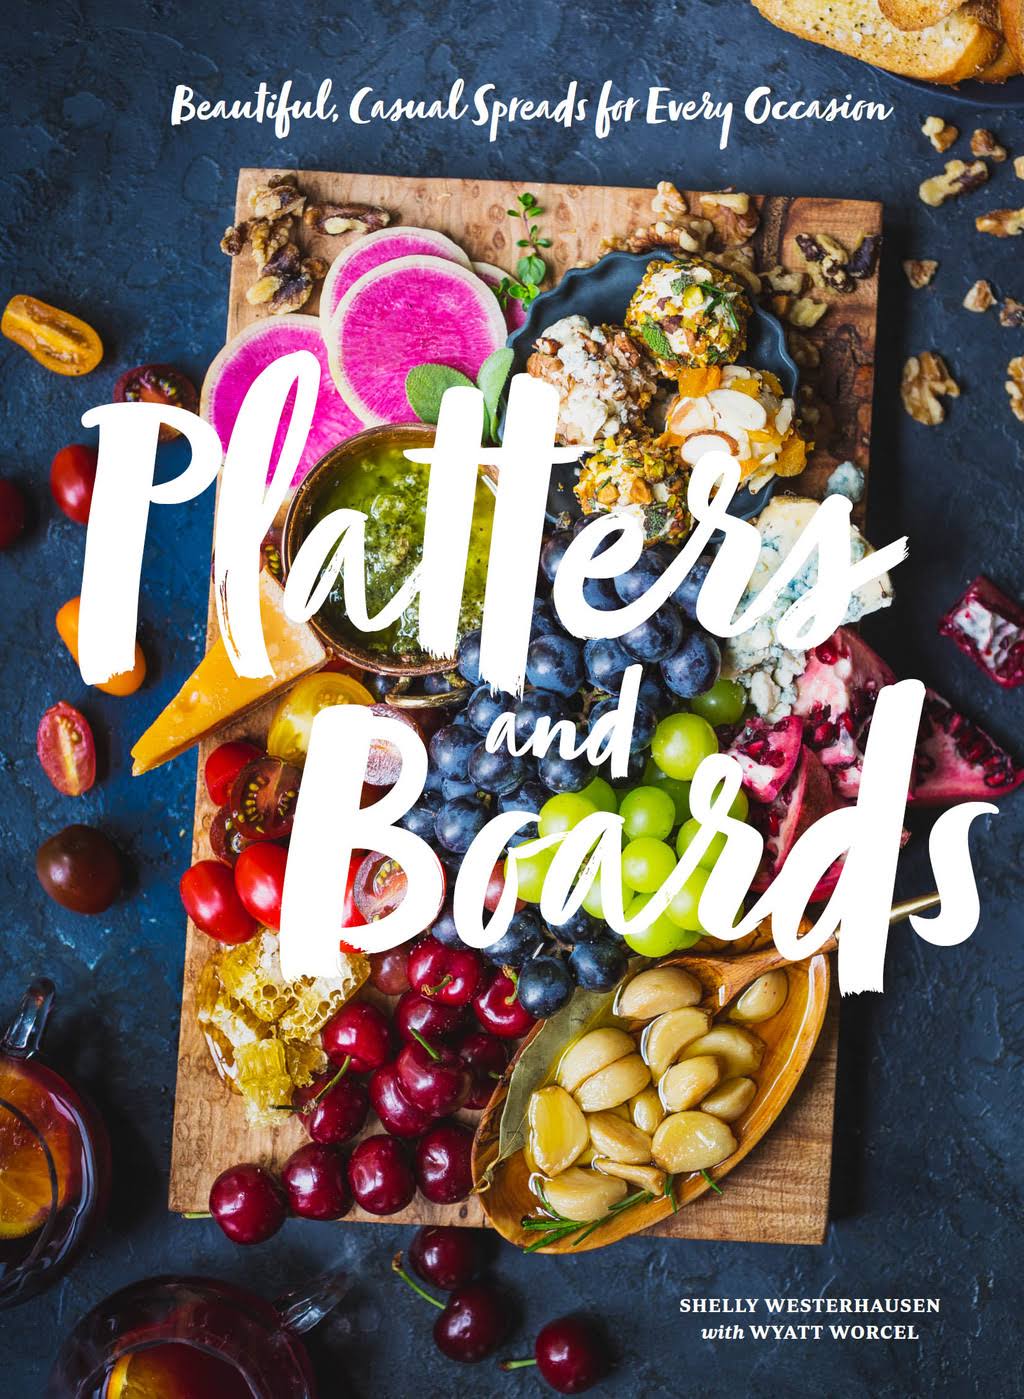 Platters and Boards: Beautiful, Casual Spreads for Every Occasion (Appetizer Cookbooks, Dinner Party Planning Books, Food Presentation Books) [Book]